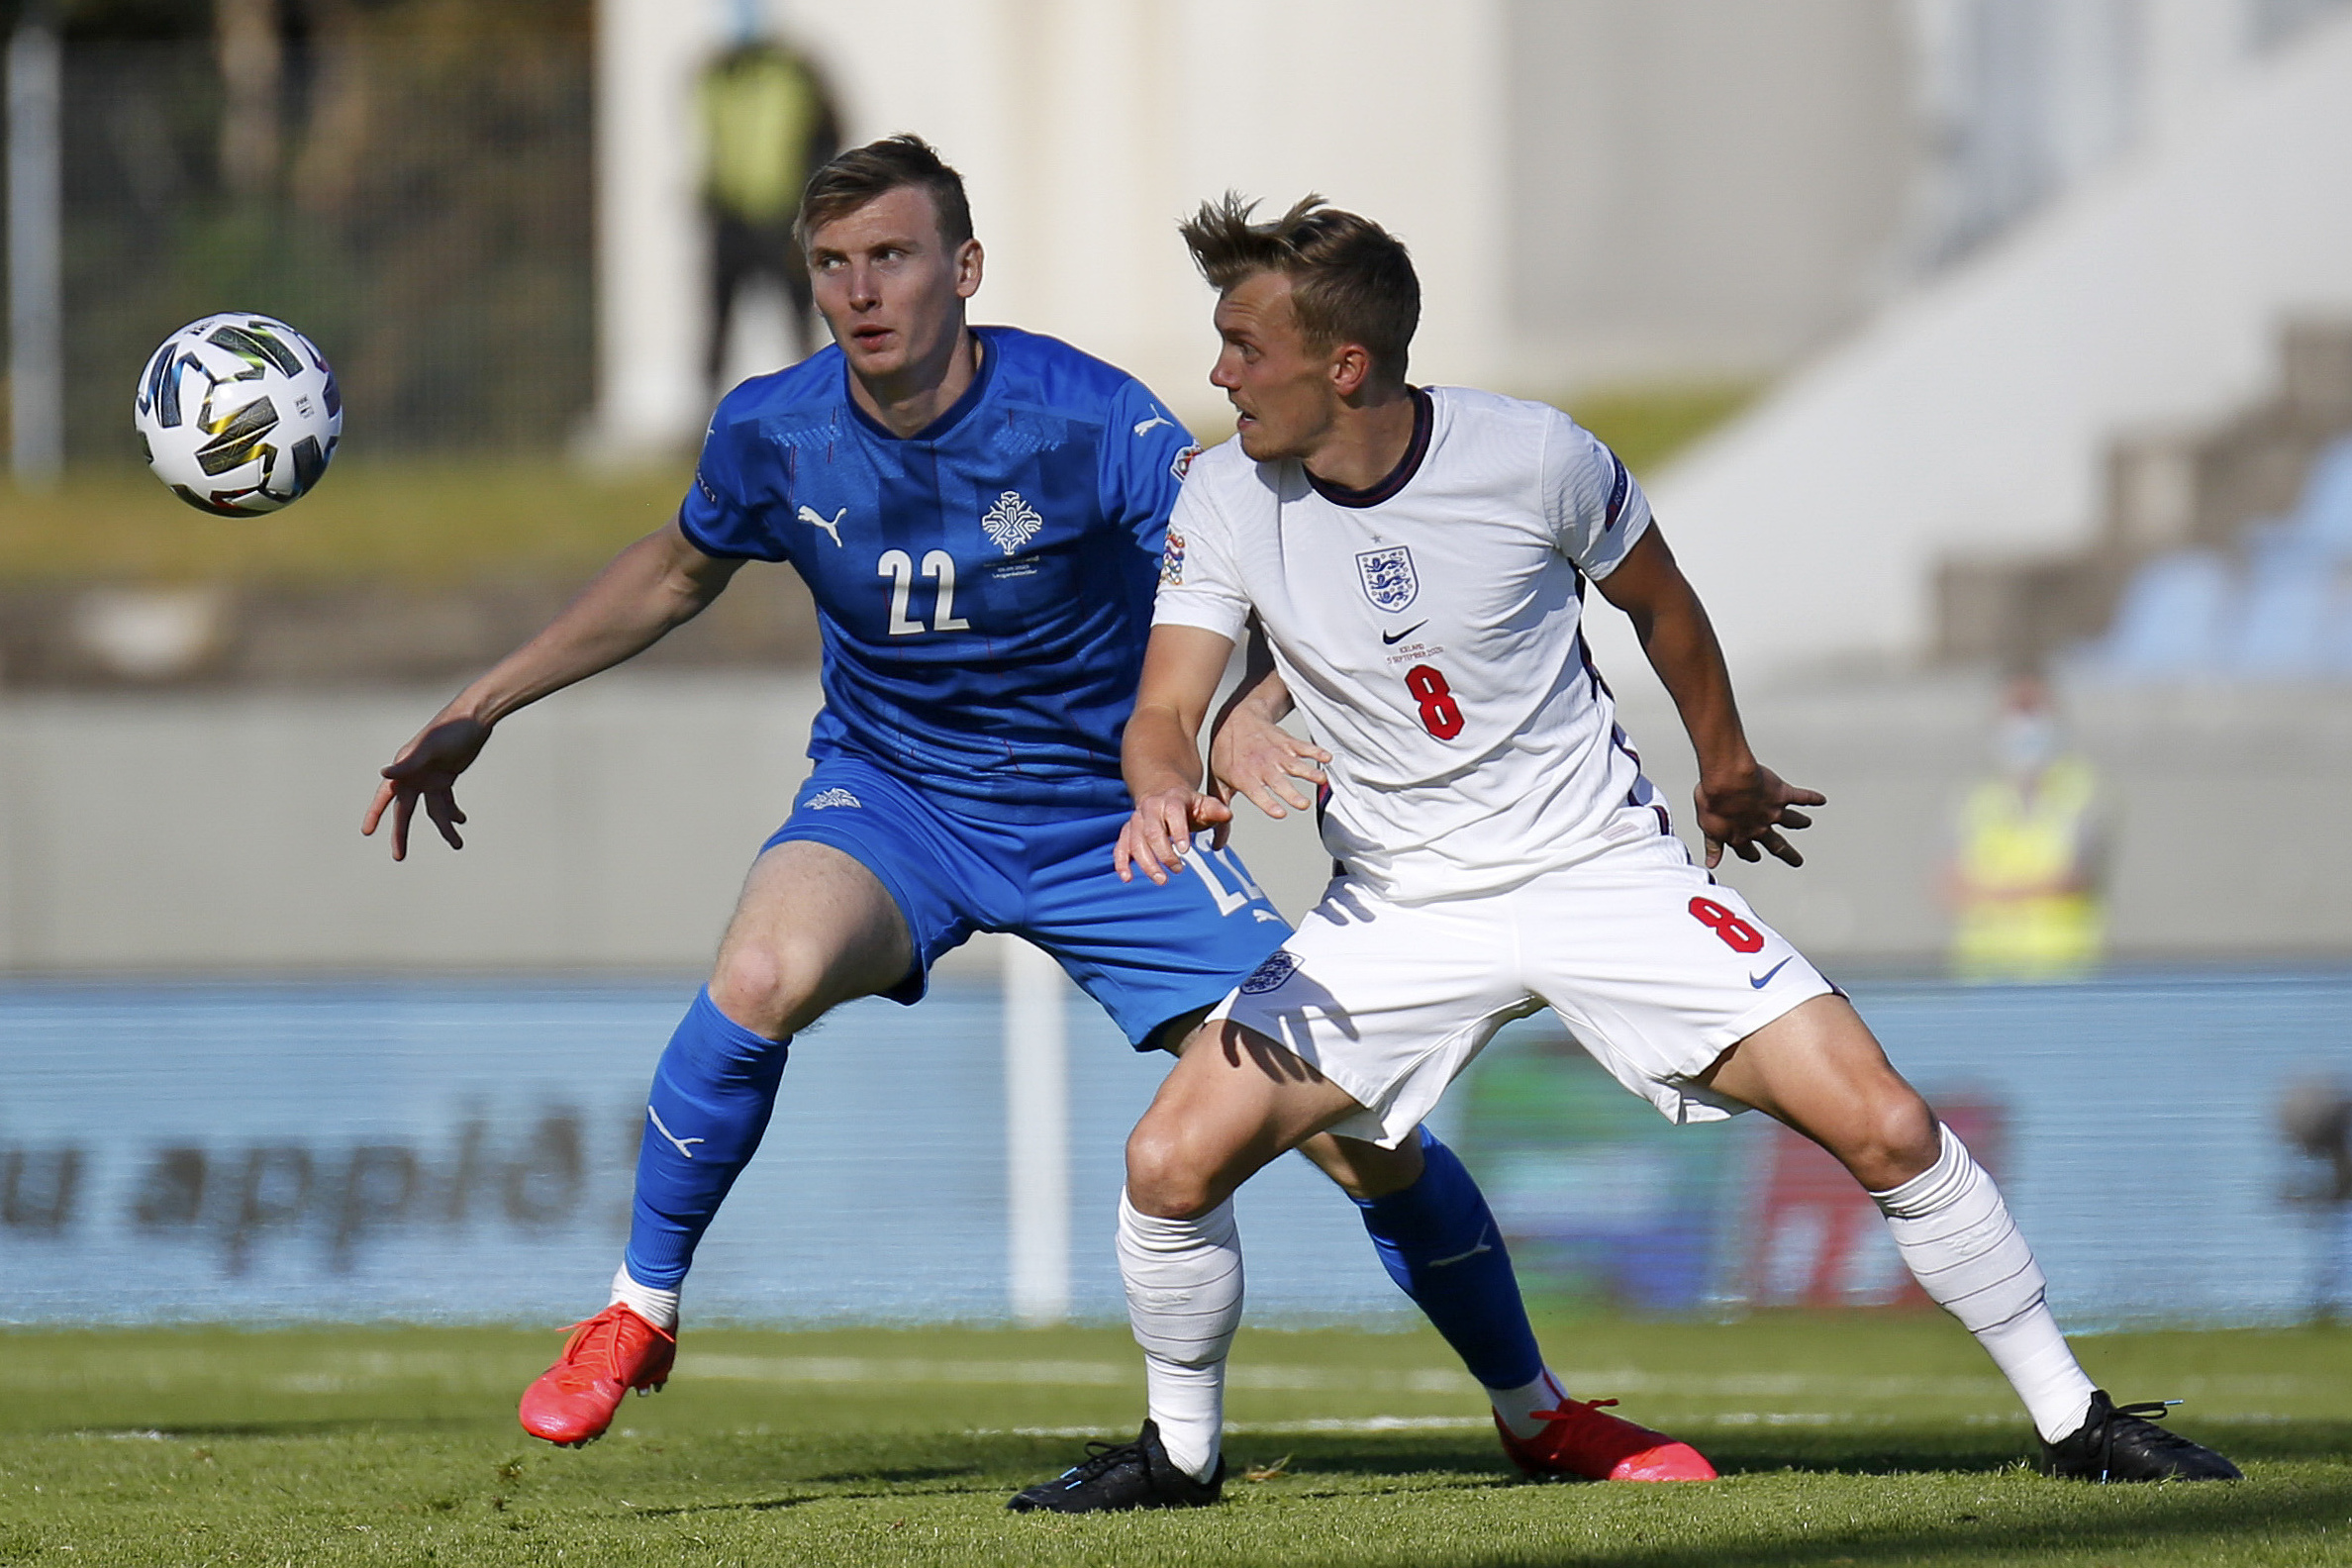 Saints duo James Ward-Prowse and Danny Ings help England to dramatic win in Iceland